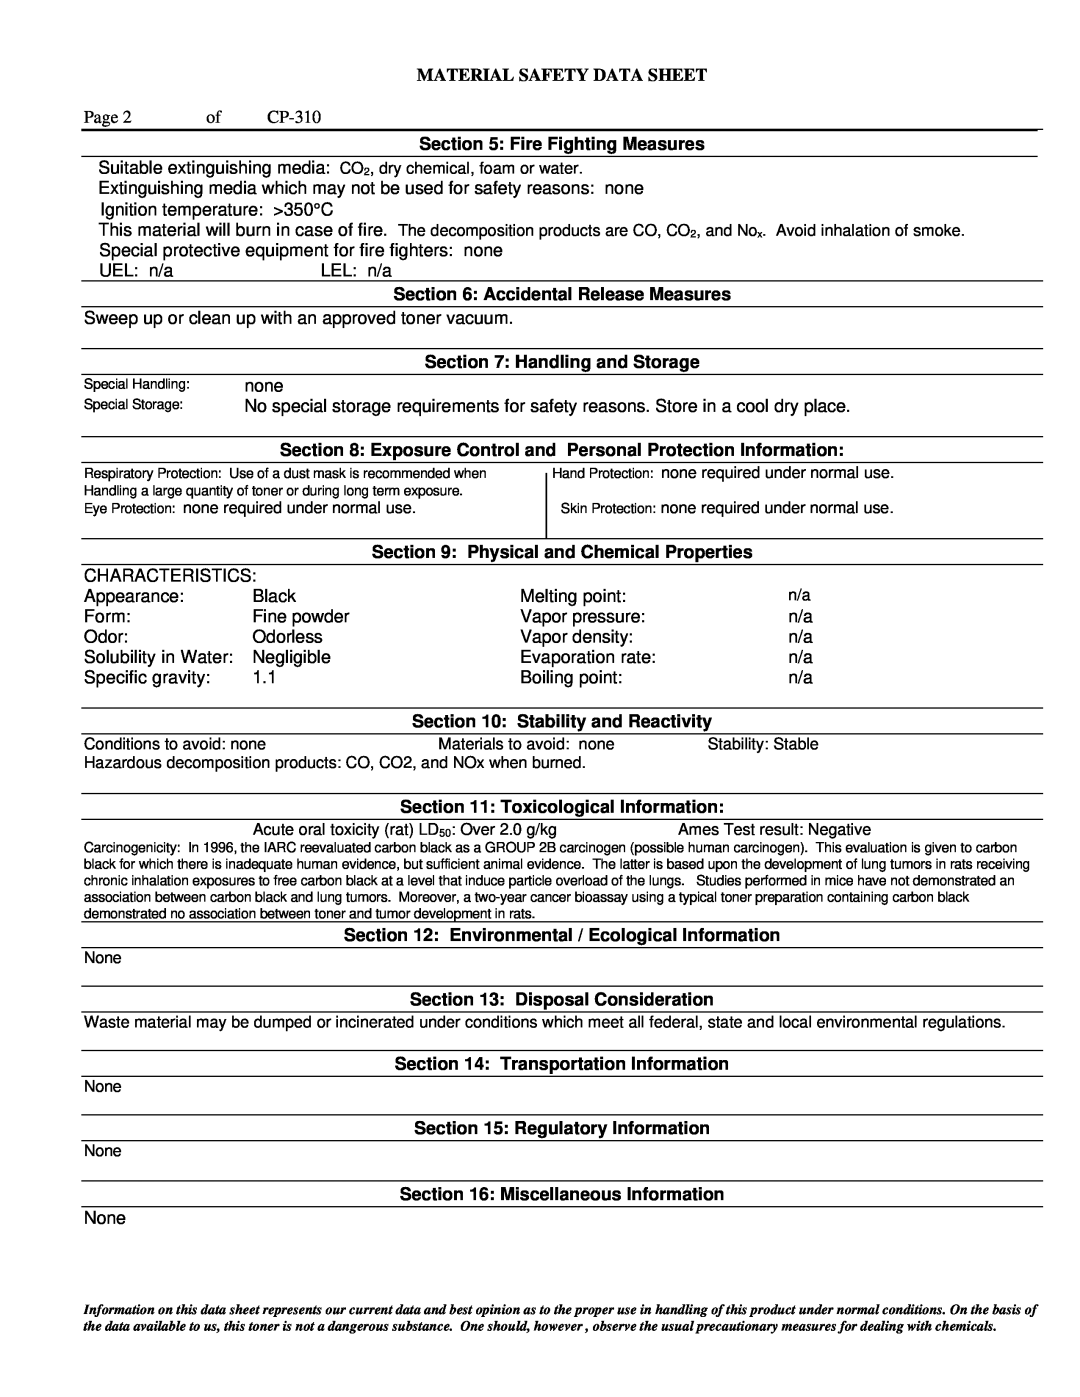 Lanier DF-4 manual Material Safety Data Sheet, Fire Fighting Measures 